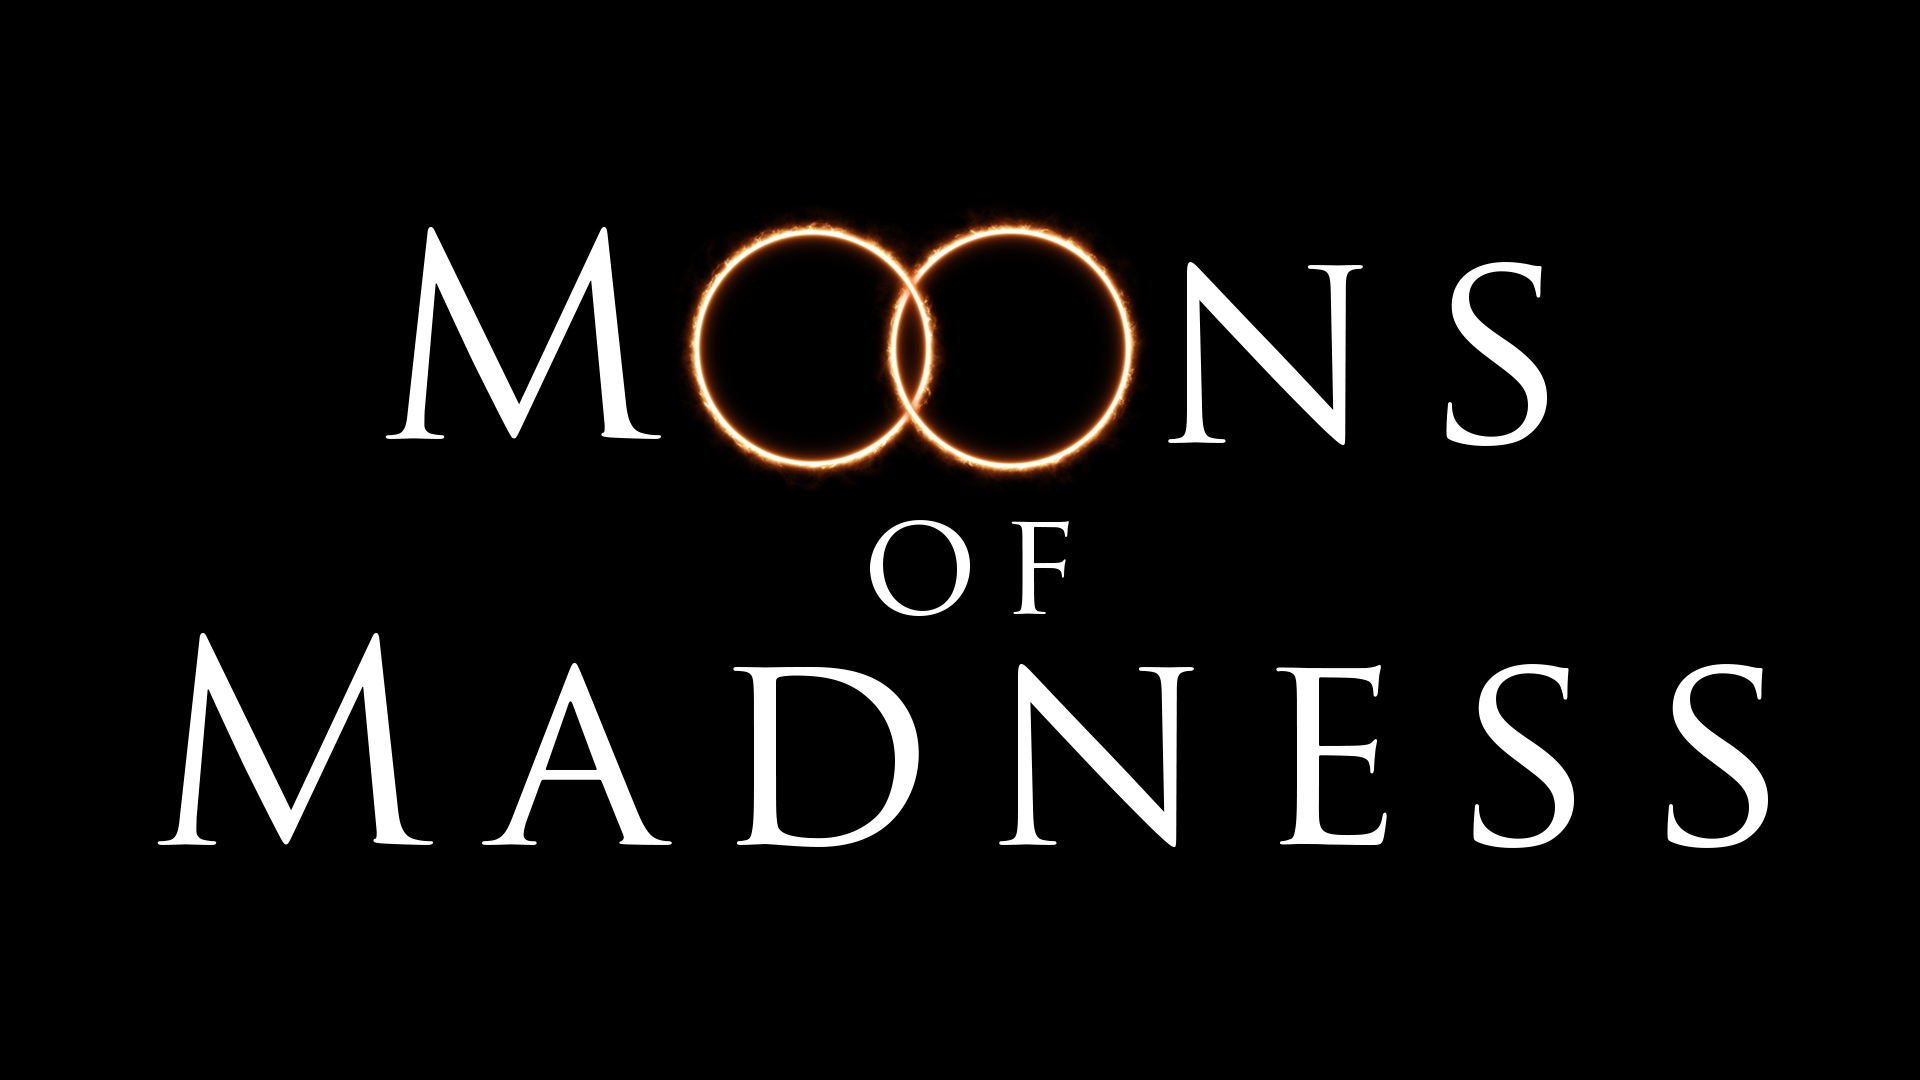 Moons of madness steam фото 65